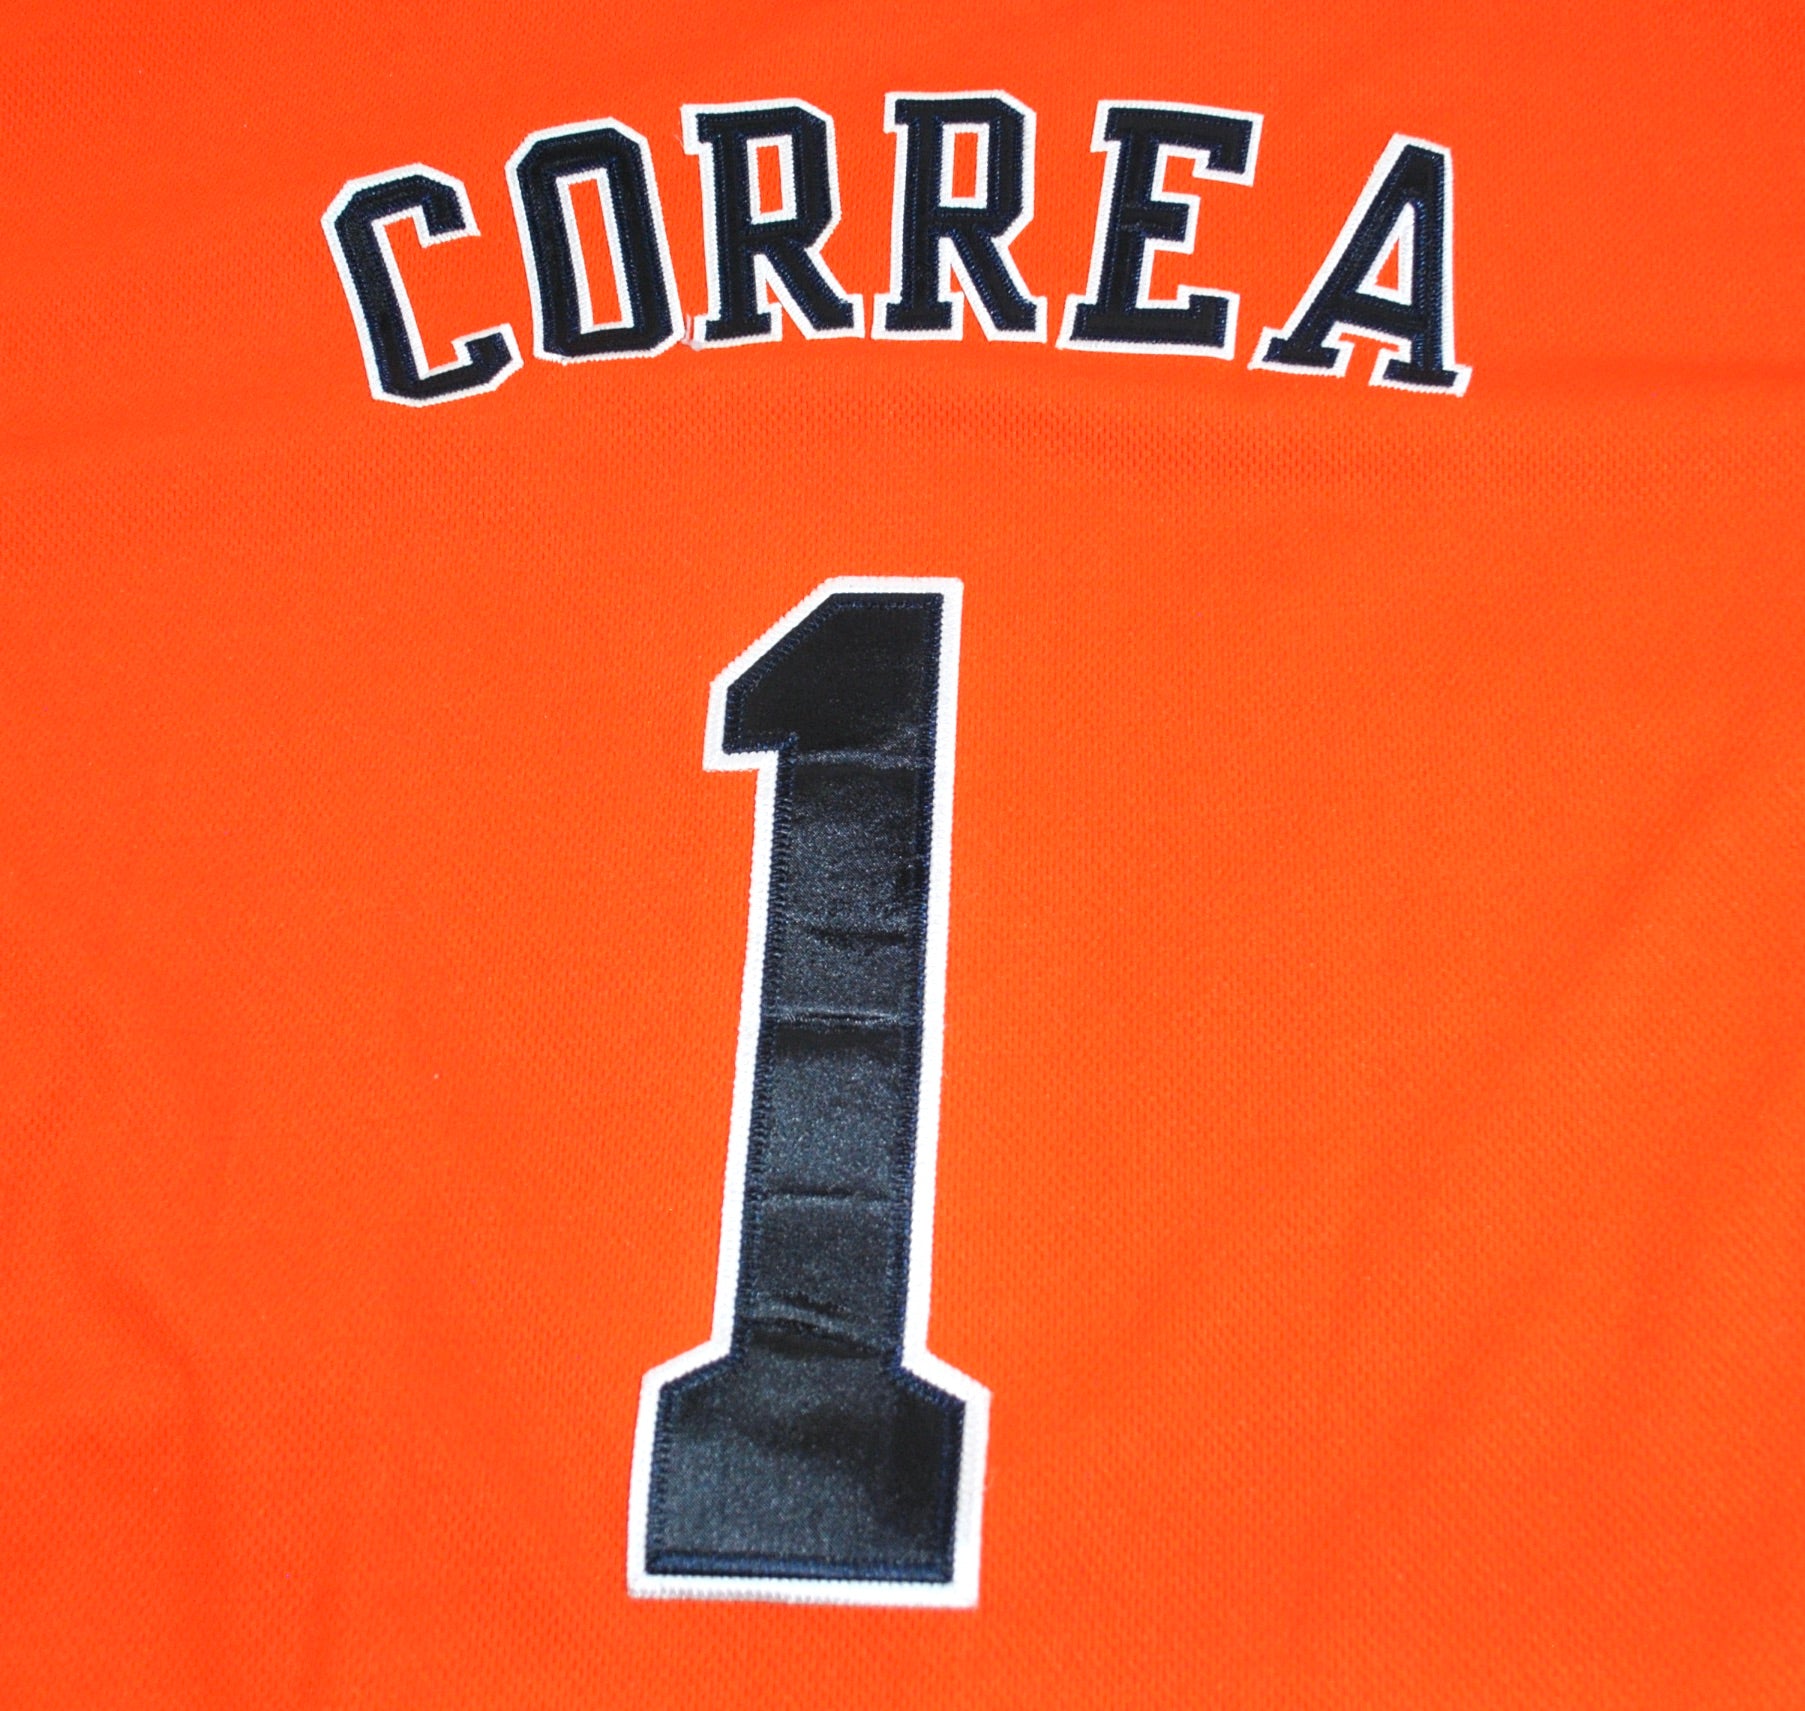 Authentic CARLOS CARREA Majestic Houston Astros THROWBACK JERSEY baseball  LARGE